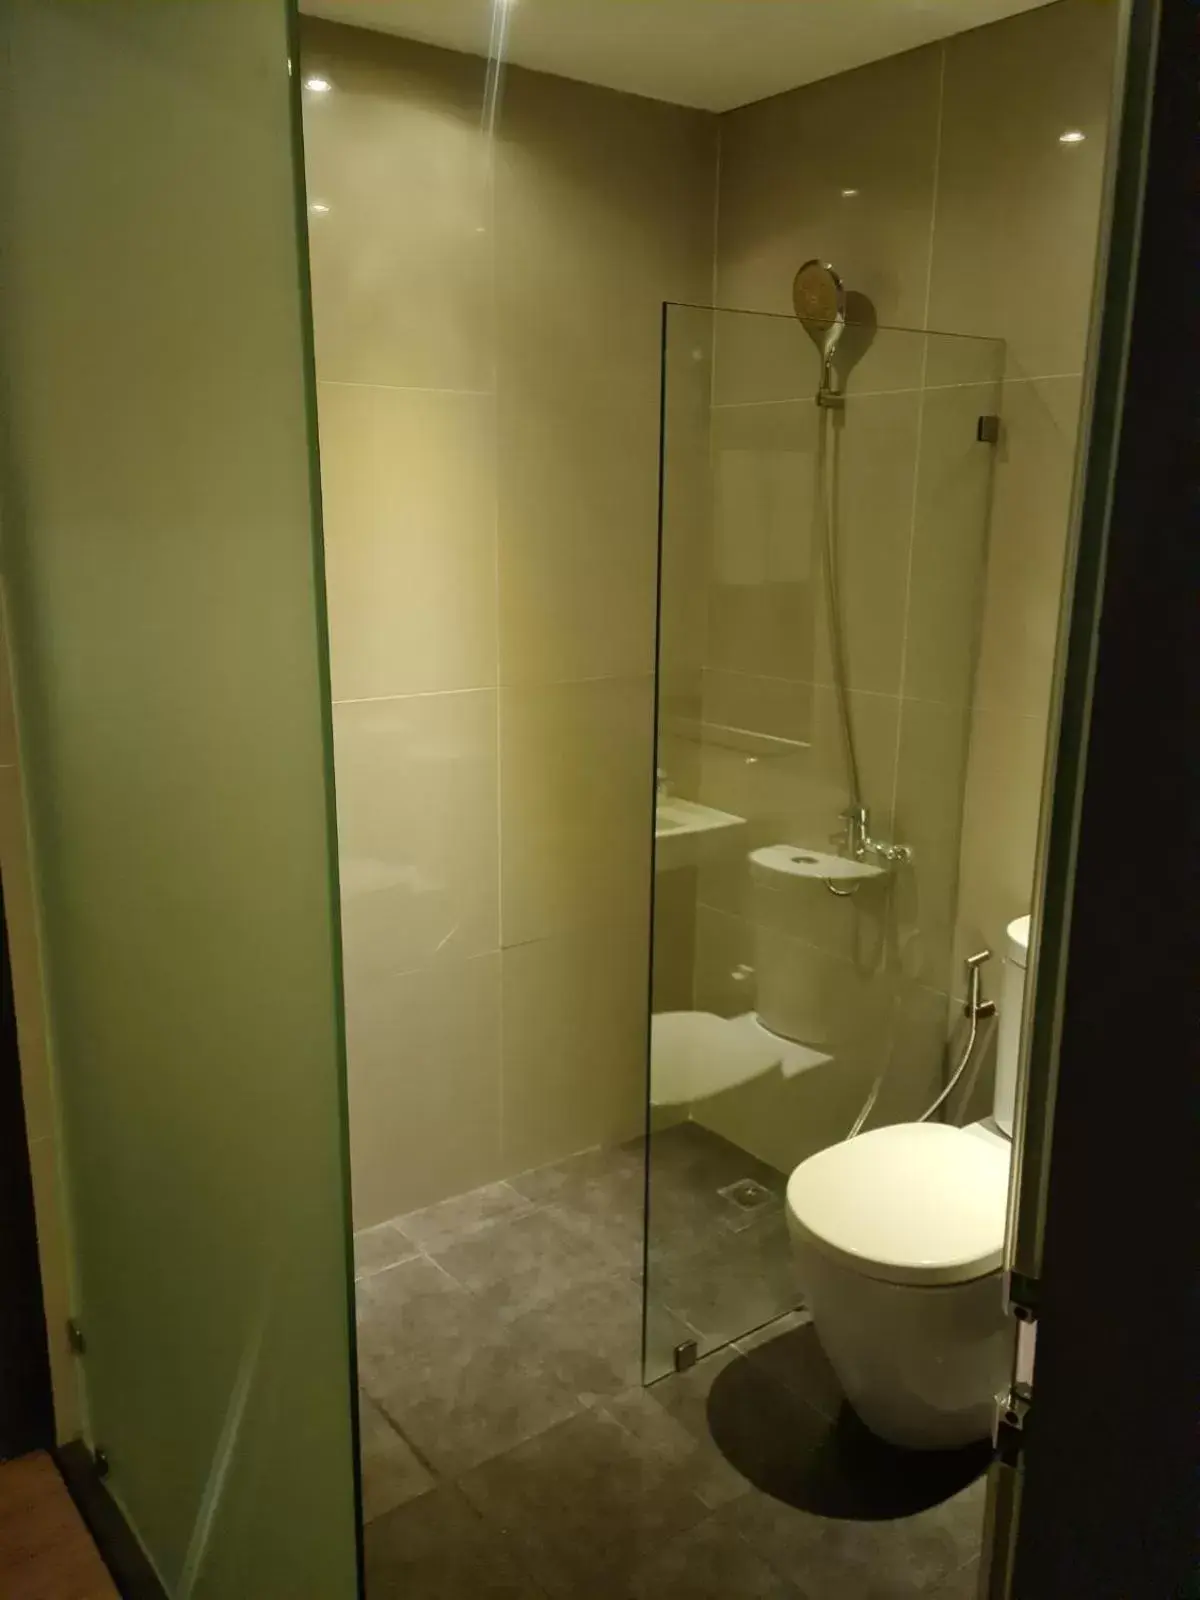 Bathroom in Azumi Boutique Hotel, Multiple Use Hotel Staycation Approved